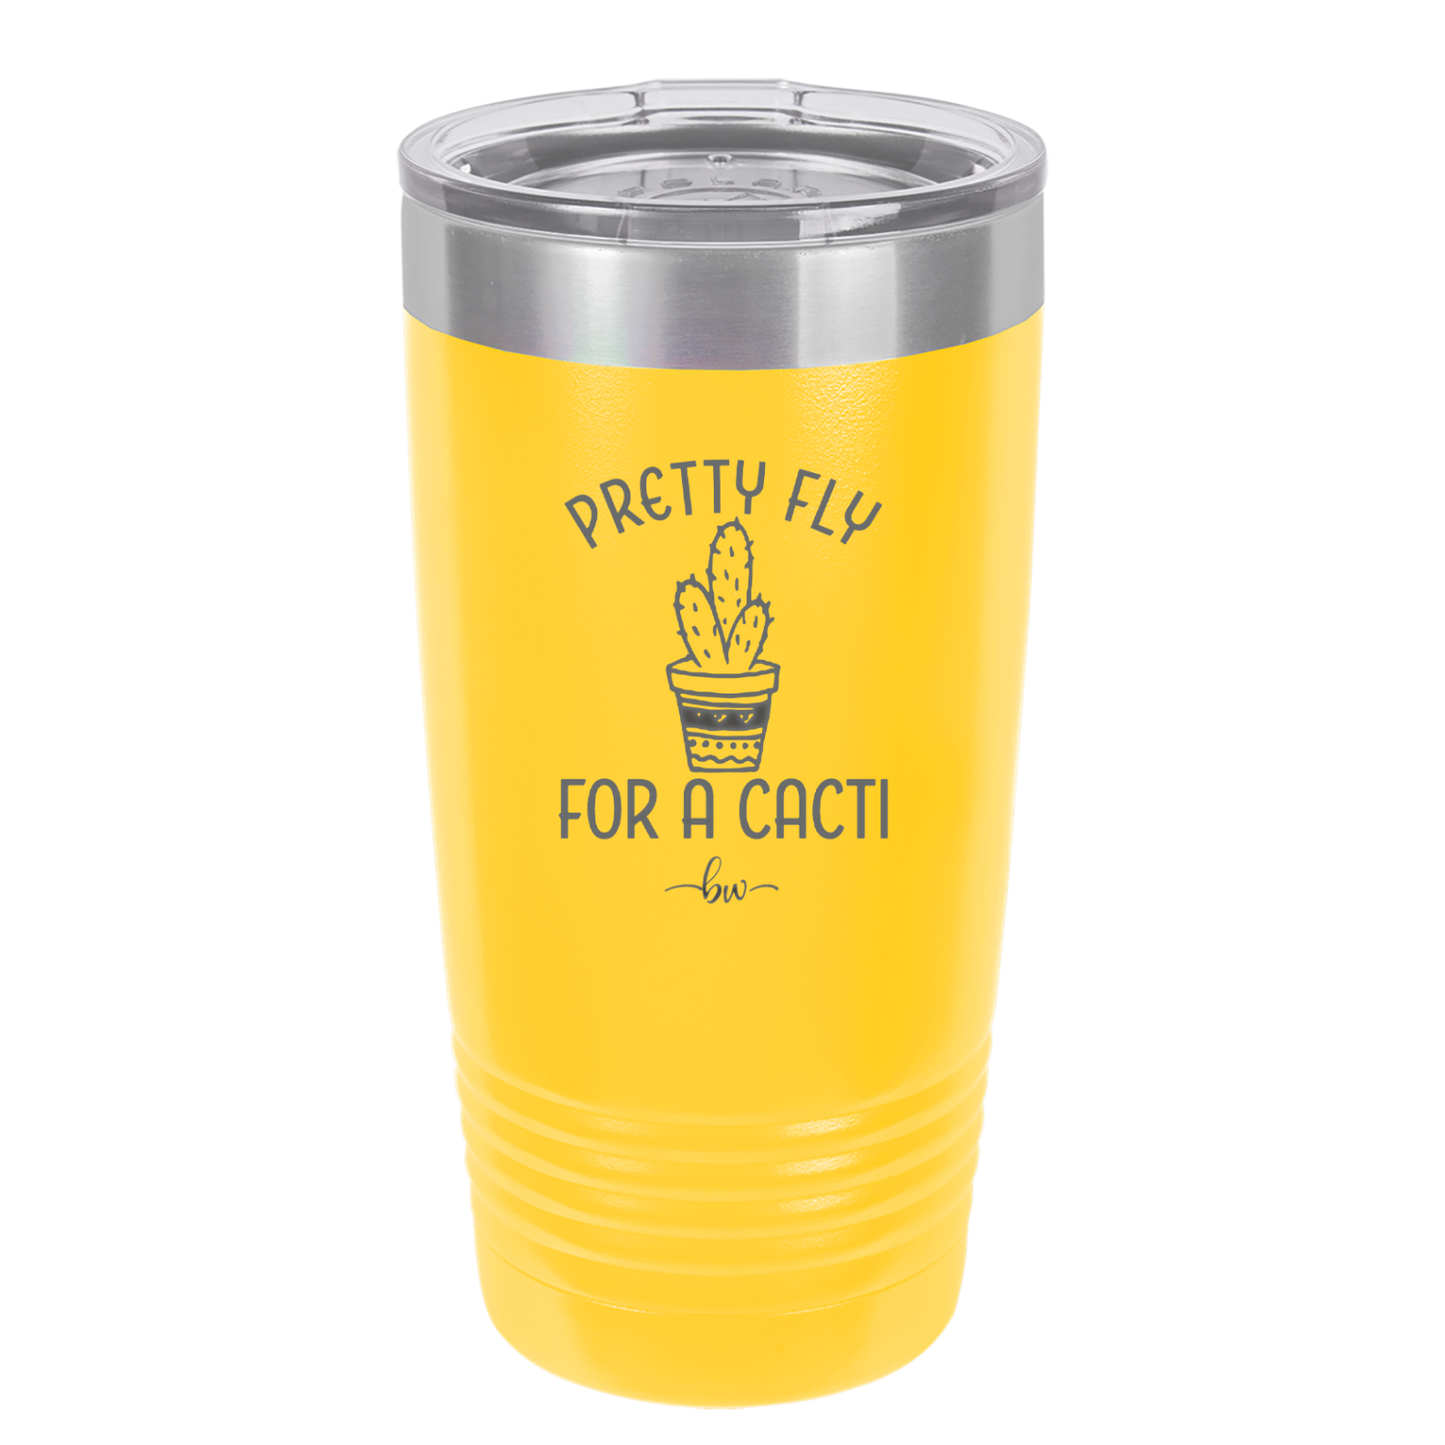 Pretty Fly for a Cacti - Laser Engraved Stainless Steel Drinkware - 2081 -